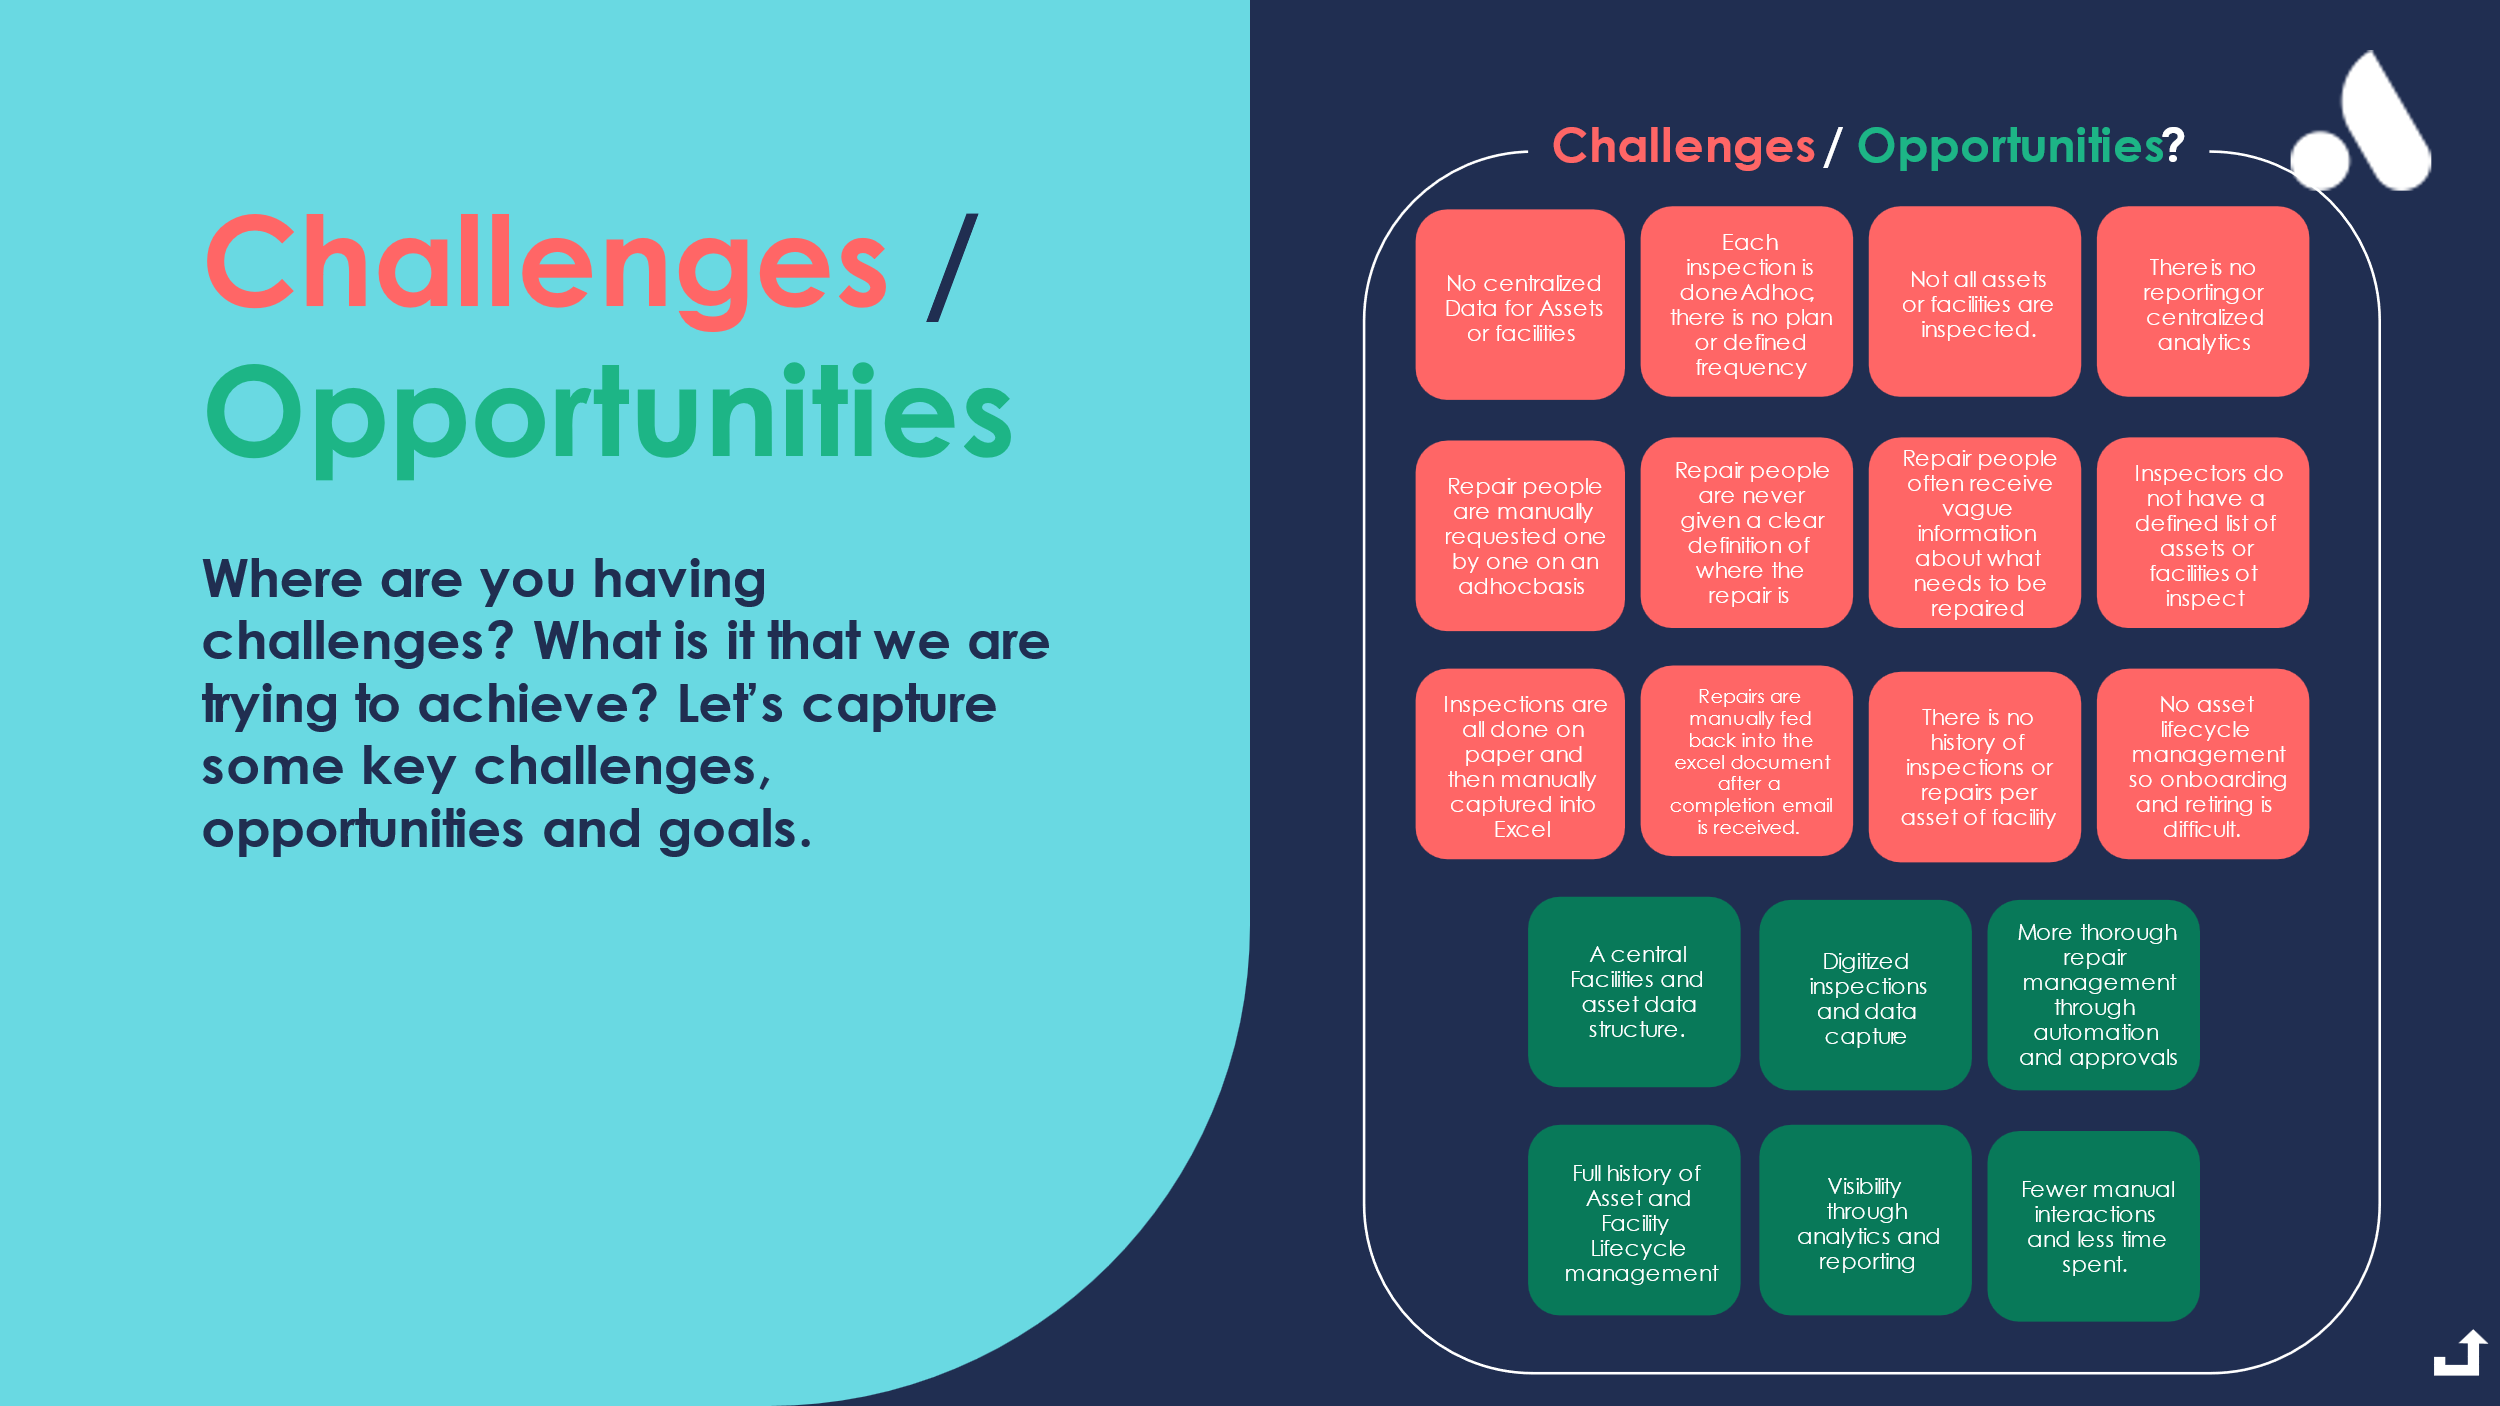 Figure 6: A summarized version of the challenges and opportunities board